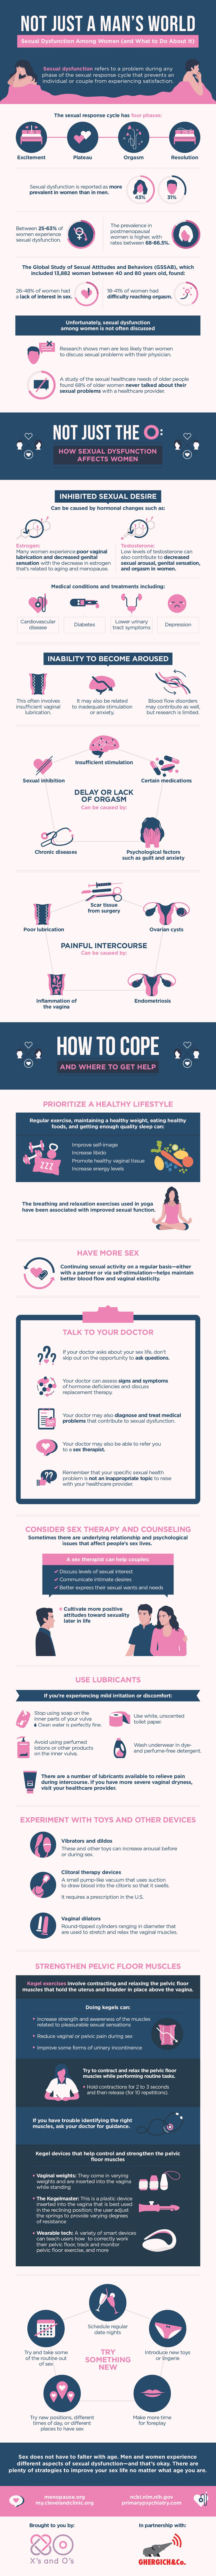 not just a mans world sexual dysfunction among women and what to do about it 1 - Not Just a Man’s World Sexual Dysfunction Among Women - Xs and Os